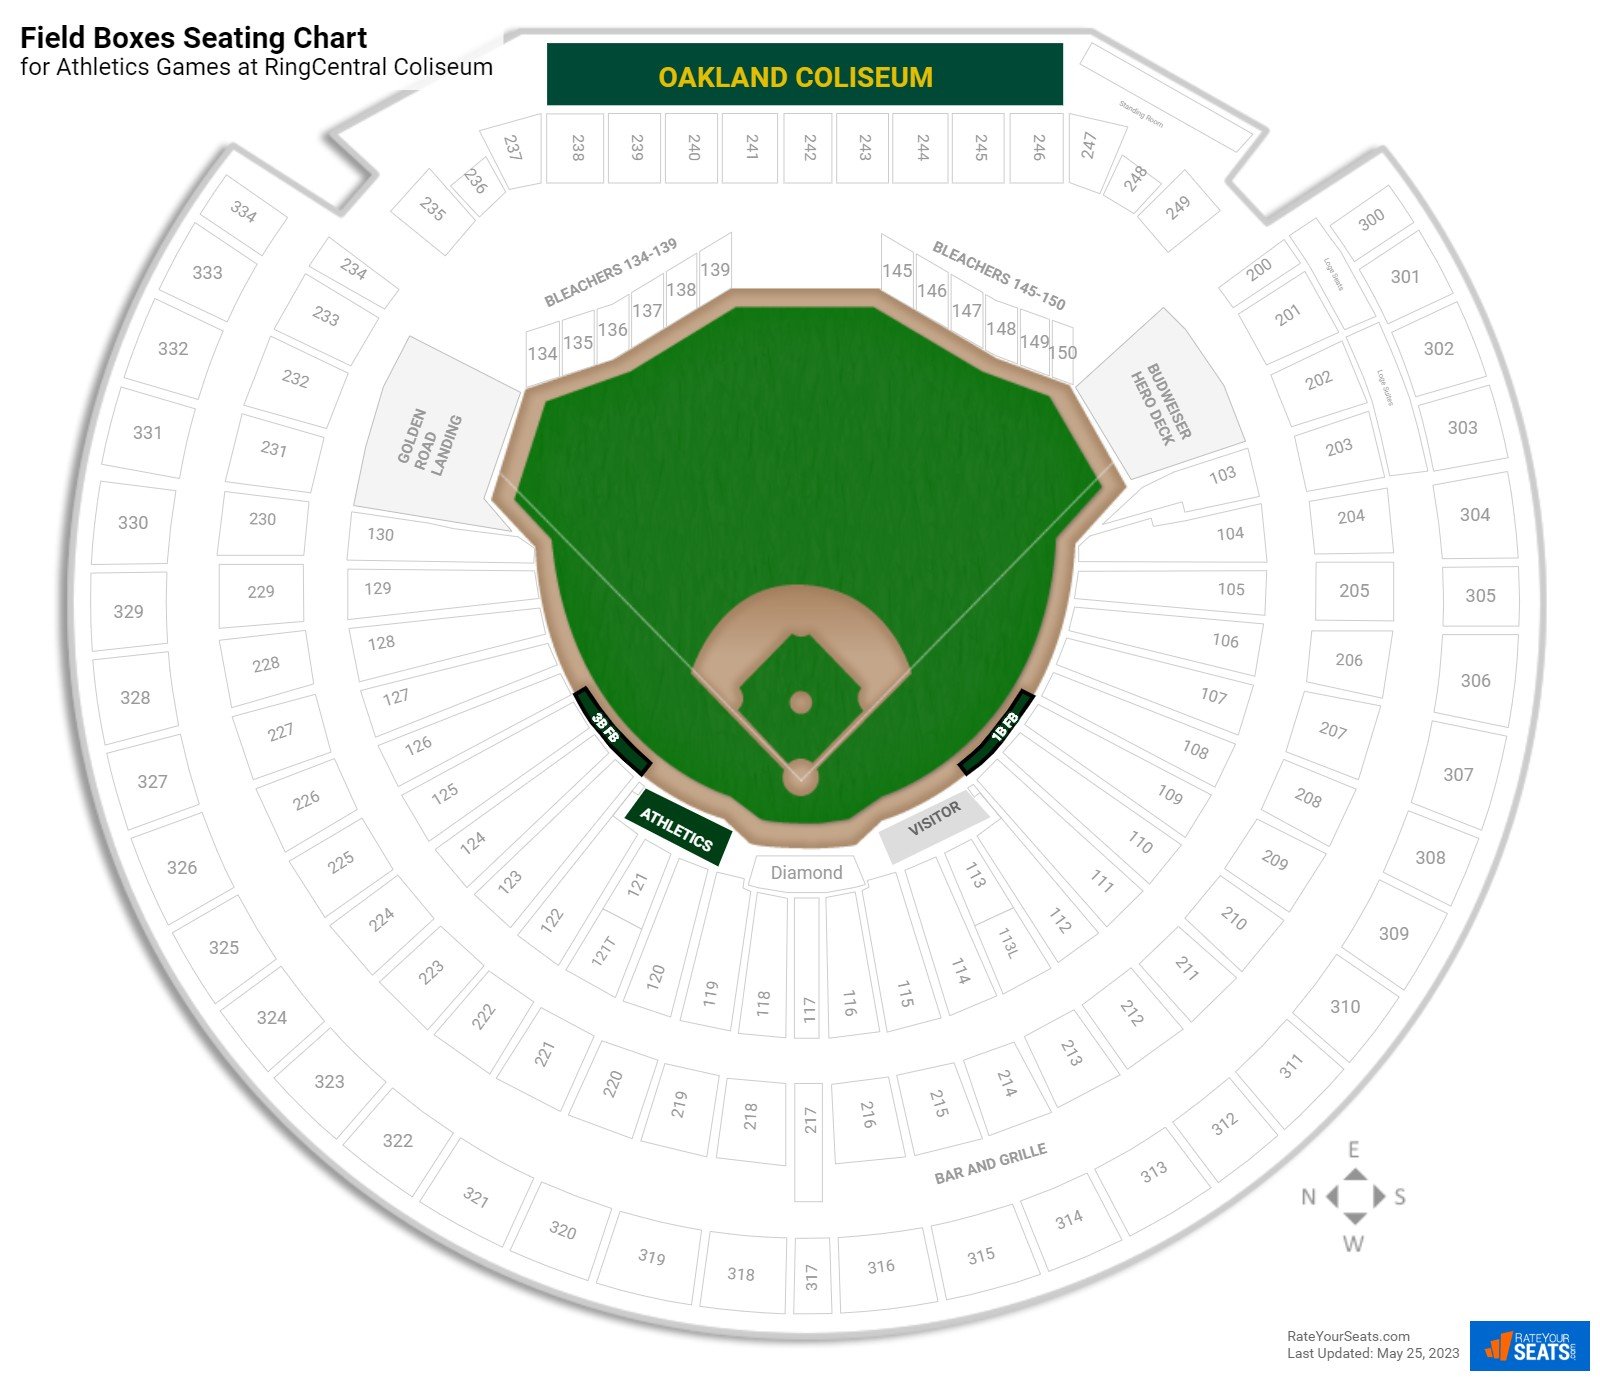 Athletics Field Boxes Seating Chart at RingCentral Coliseum